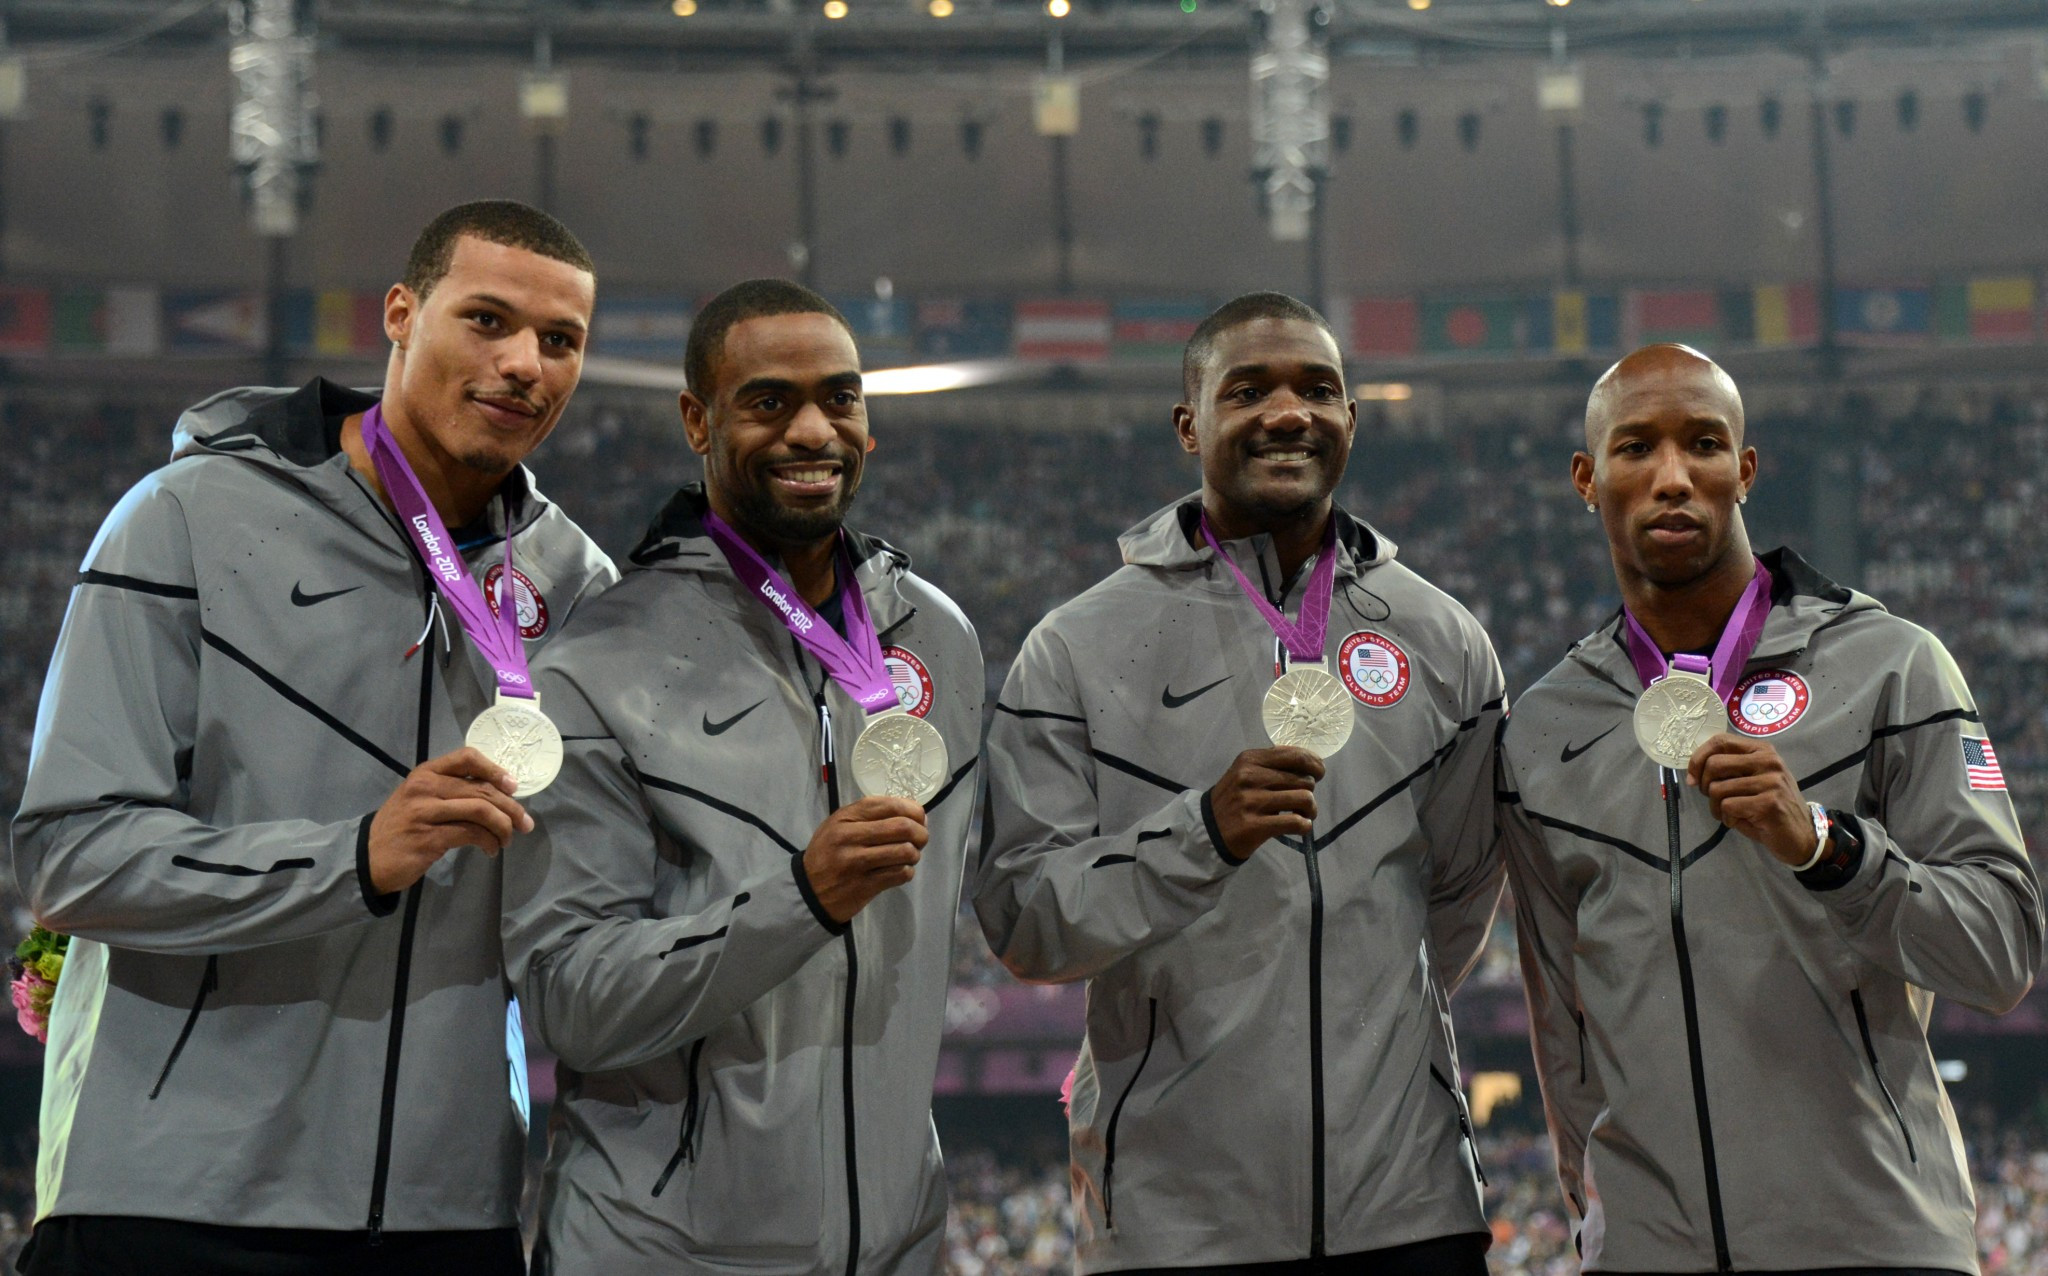 Ryan Bailey, left, was part of the United States' 4x100m relay team who won silver at London 2012 before Tyson Gay's, second left, failed drugs test in 2013 saw them disqualified ©Getty Images